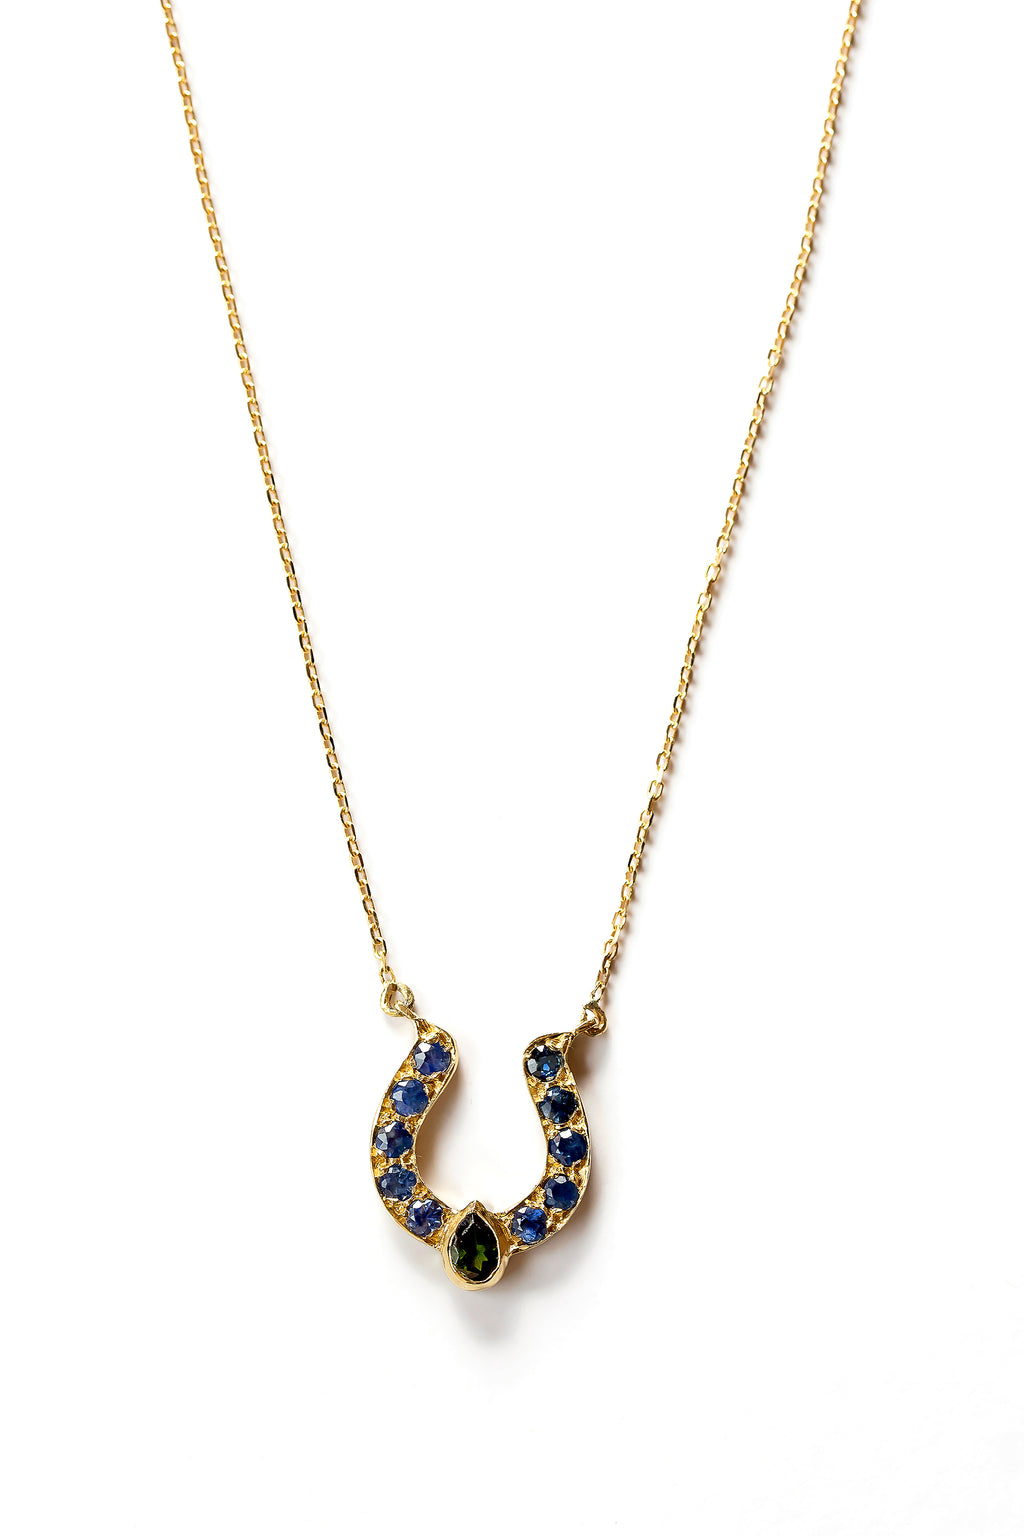 Horseshoe Necklace with Blue Sapphire and Cabochon Accent